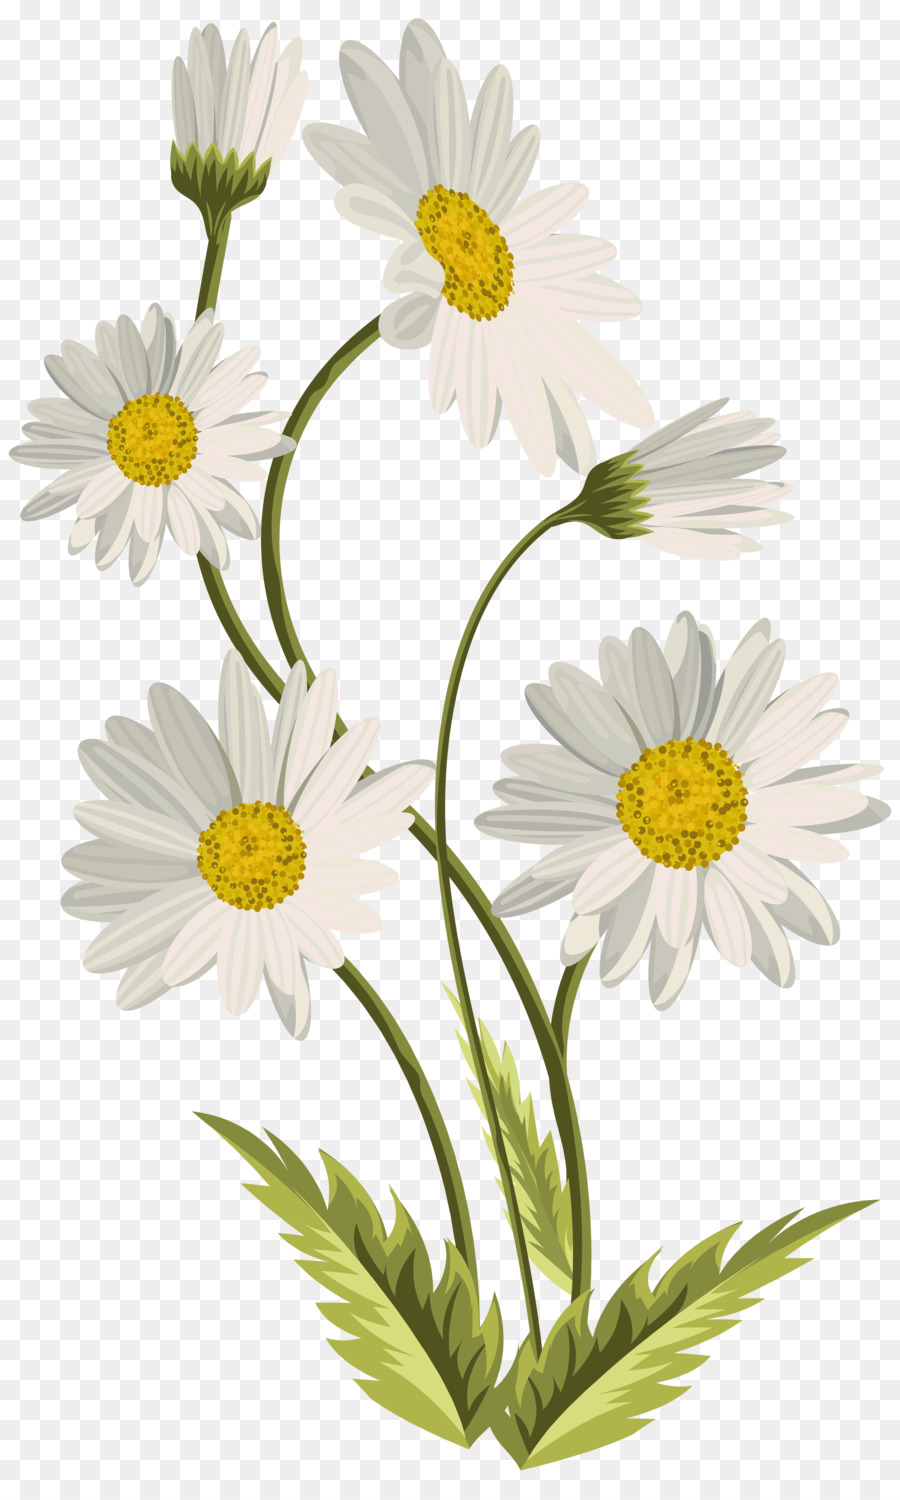 Free Daisy Clipart Transparent, Download Free Daisy Clipart Transparent